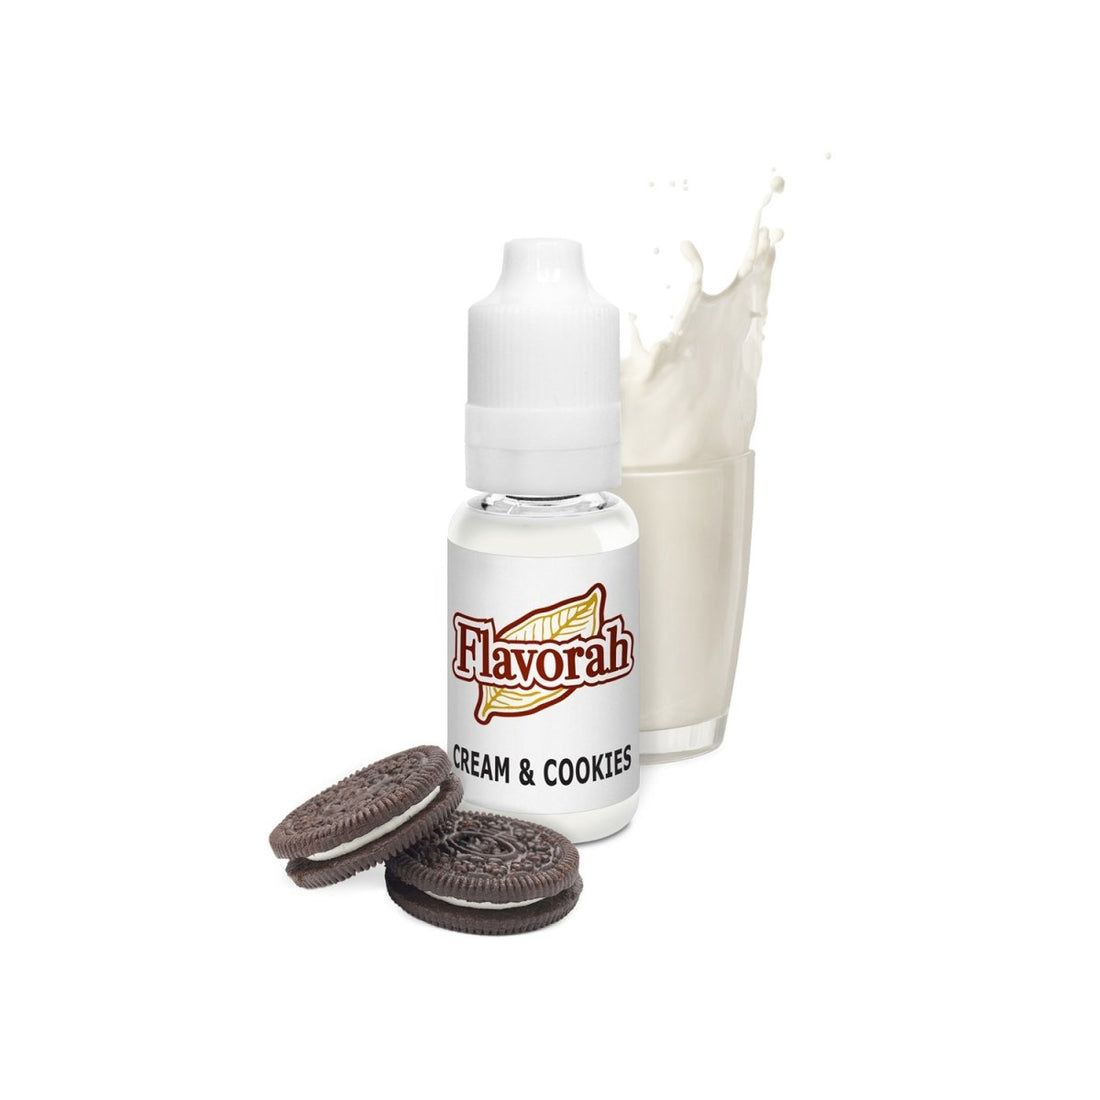 Cream and Cookies FLV - Aroma - Flavorah | AR-FLV-CAC